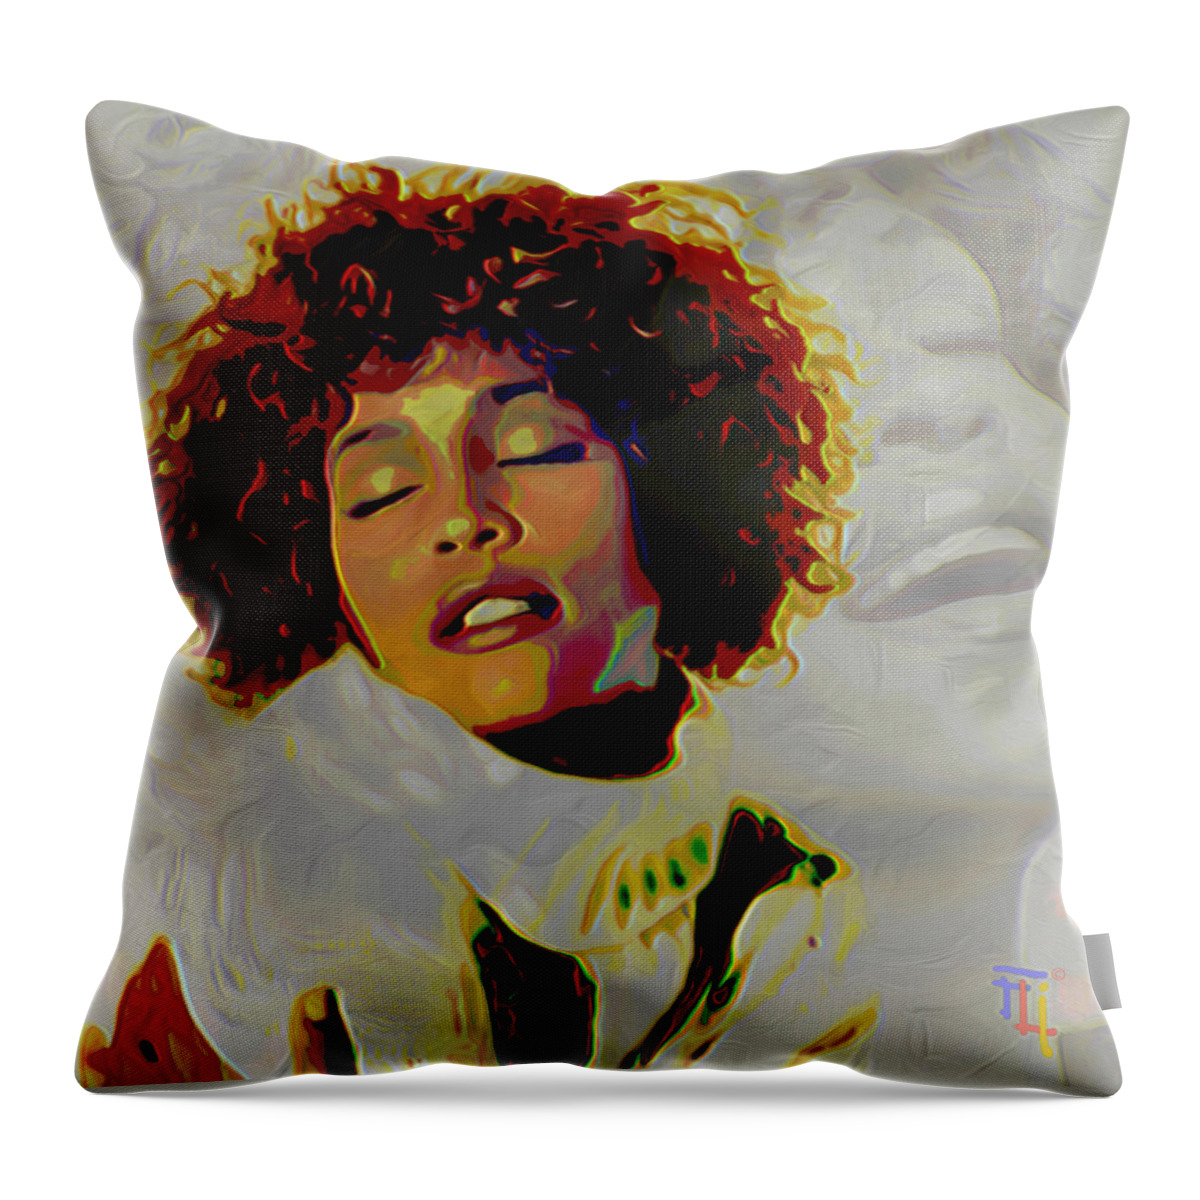 Whitney Houston; Patterns; Portraits; Face; Hair; Eyes; Nose; Mouth; Head; Woman; Girl; People; Singer; Celebrities; Famous; Actress Throw Pillow featuring the painting Whitney Houston by Fli Art